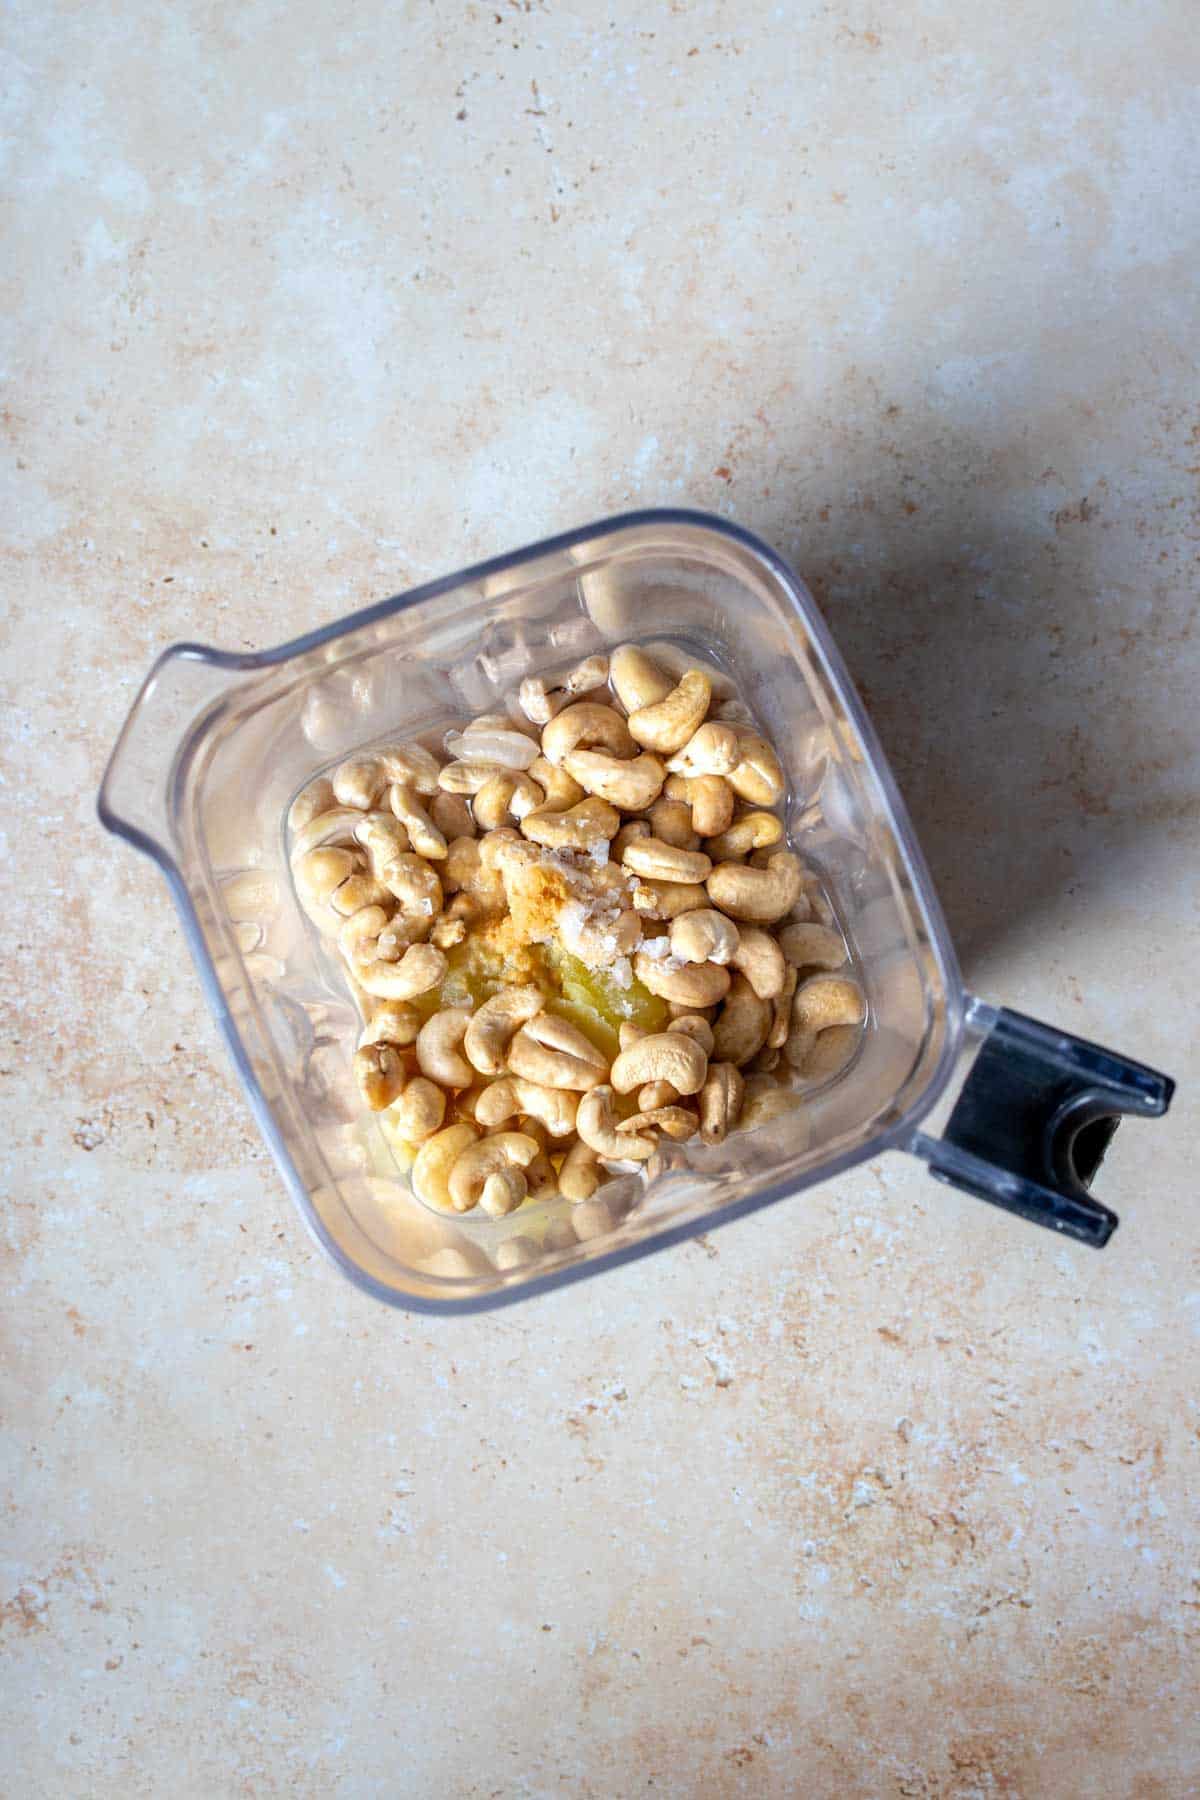 Overhead view of a blender with cashews, potato, spices and white beans and milk underneath.